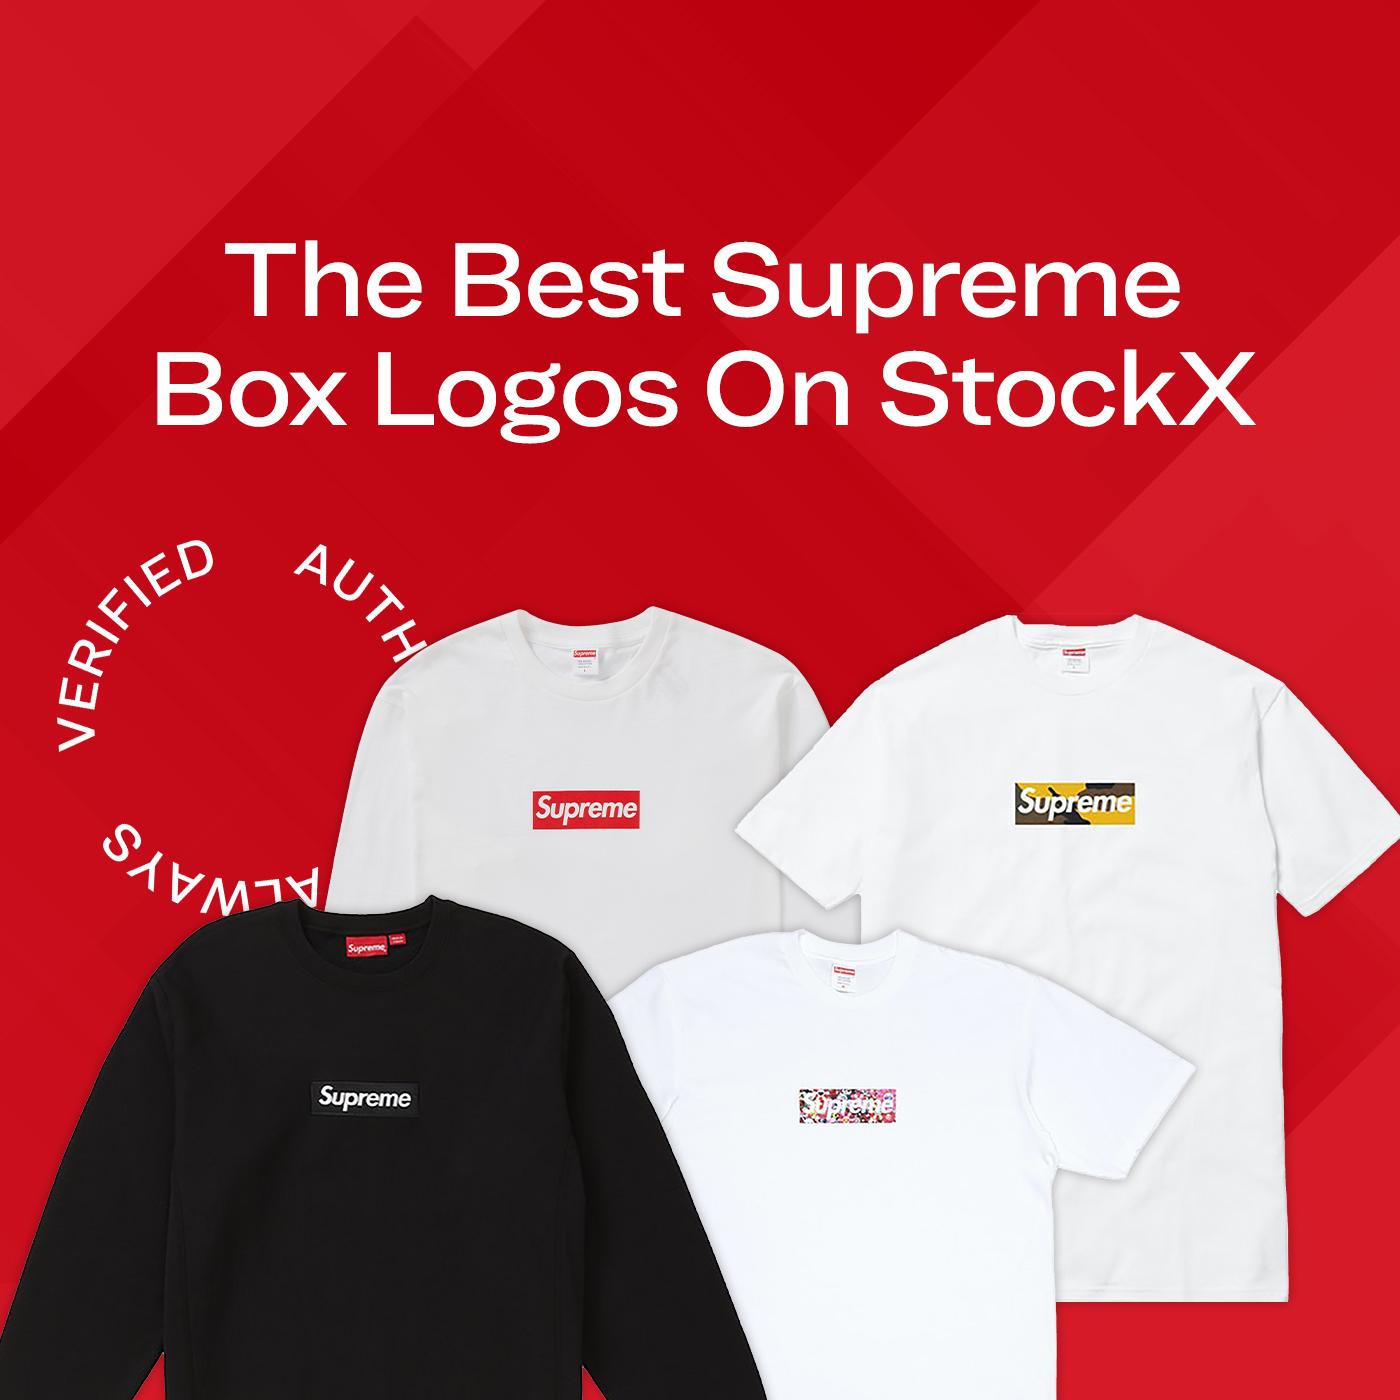 How to see if your Supreme Box Logo is REAL or FAKE! 